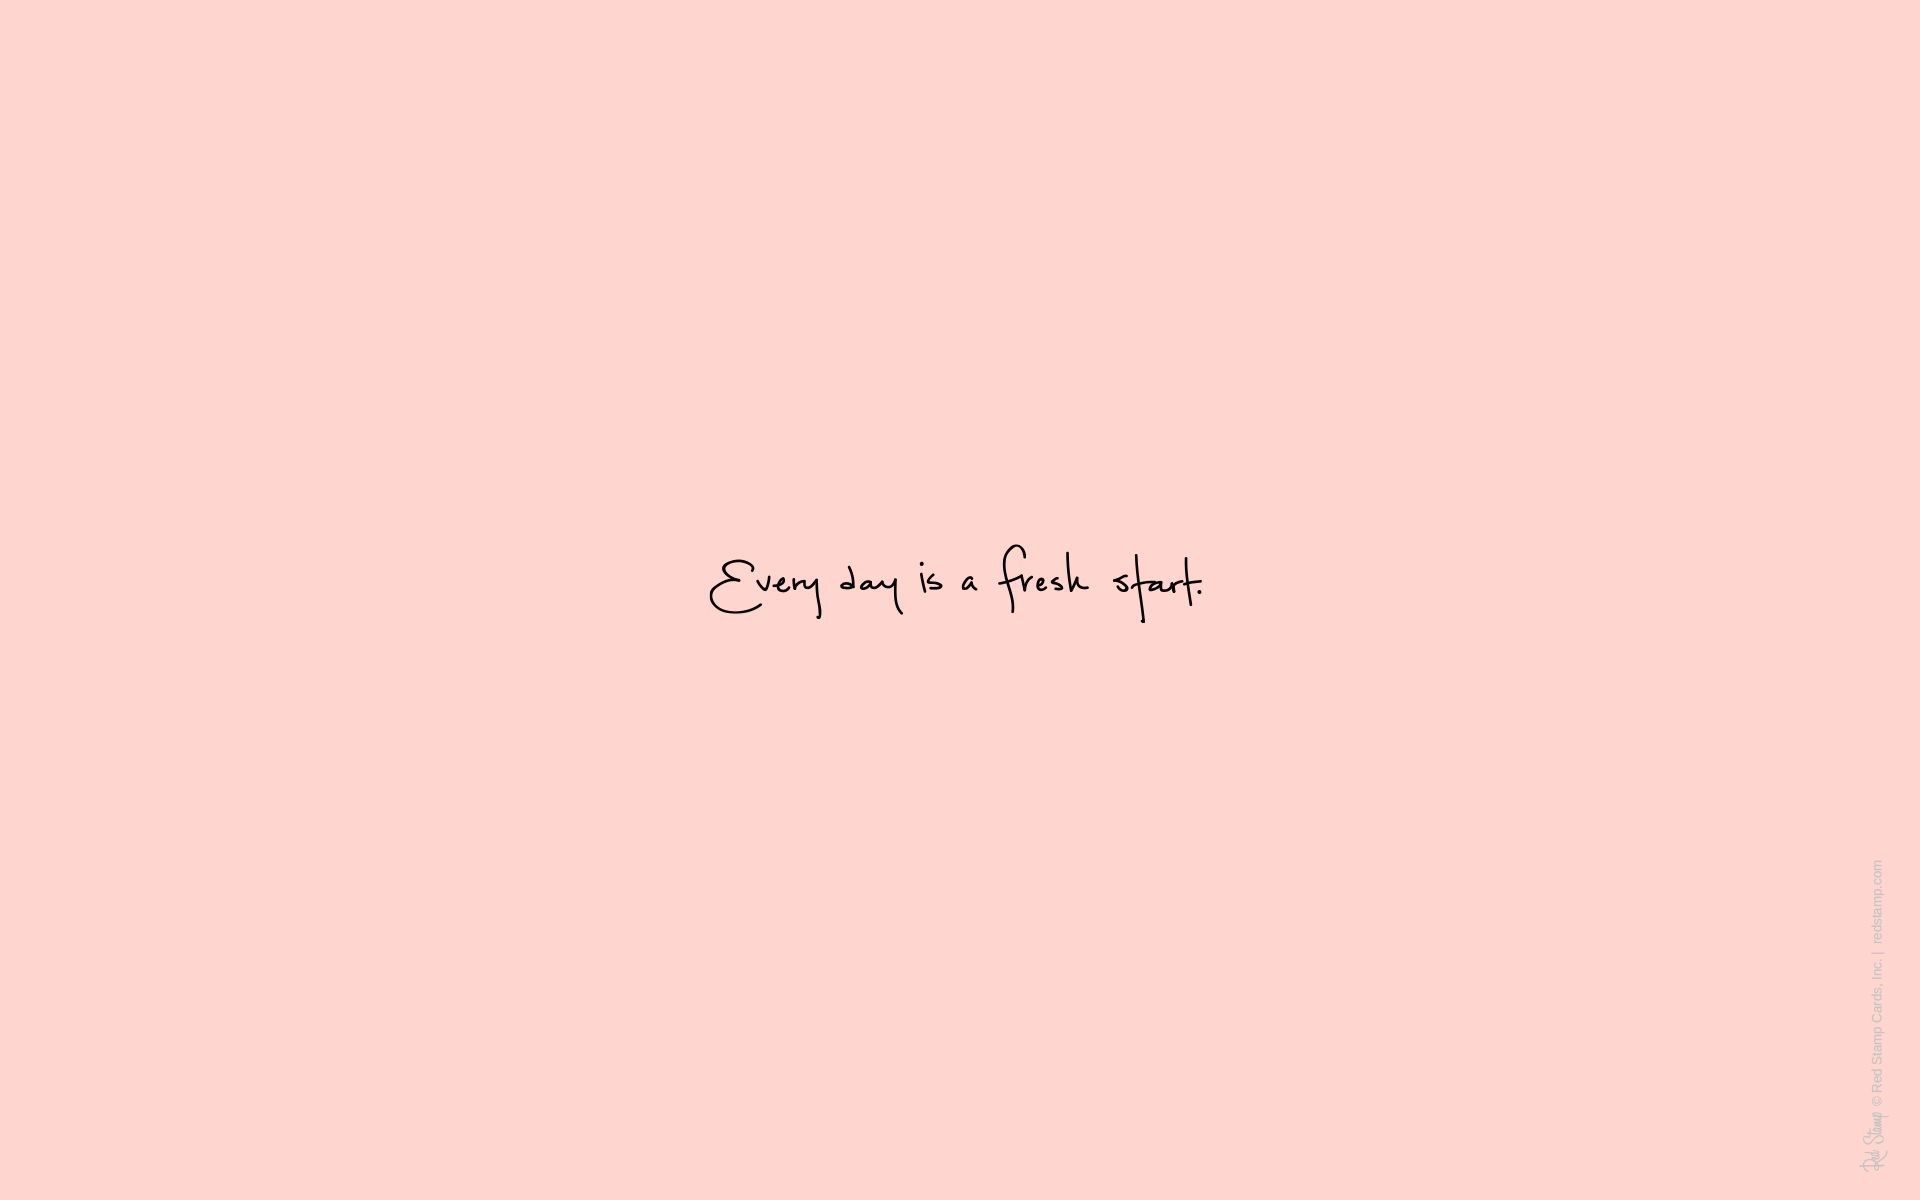 Every day is a fresh start quote desktop wallpaper in light pink - Pink, laptop, study, princess, Melanie Martinez, computer, pastel, pastel pink, couple, peach